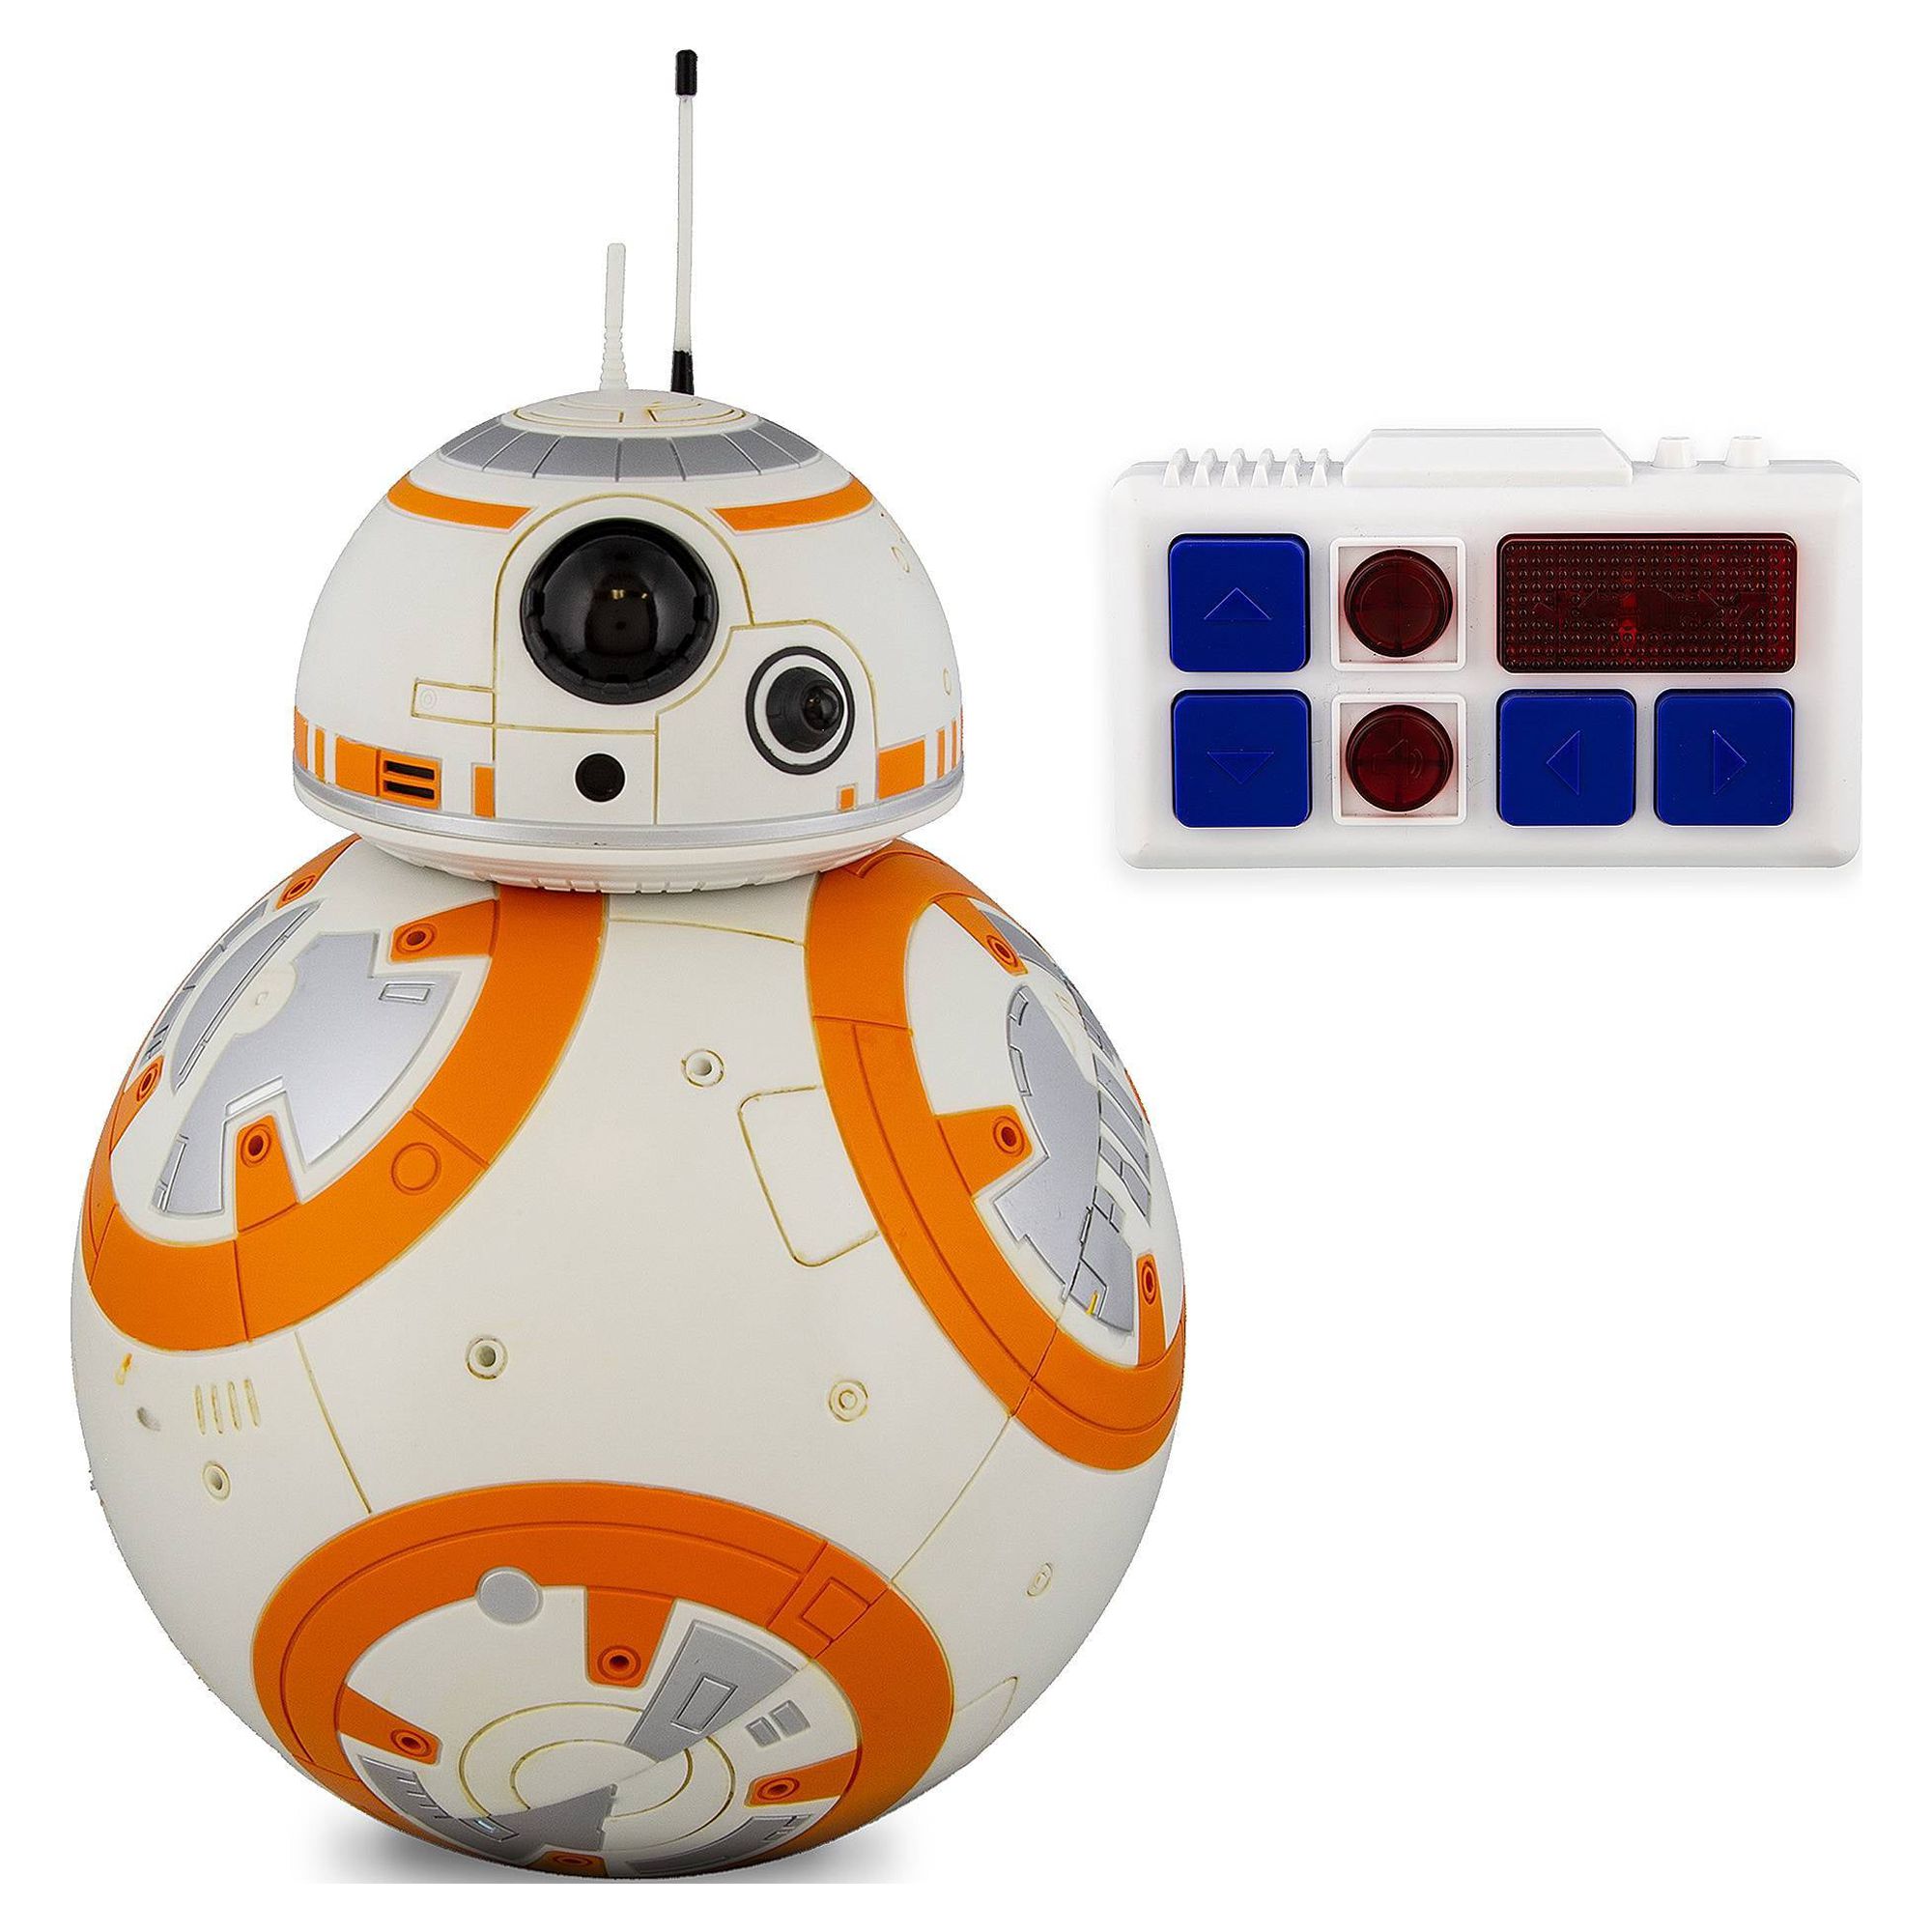 Disney Star Wars BB-8 Interactive Remote Control Droid Depot - H 11 2/5'' (to the top of his antenna) x L 7 1/8" x W 7 1/8" - image 2 of 3